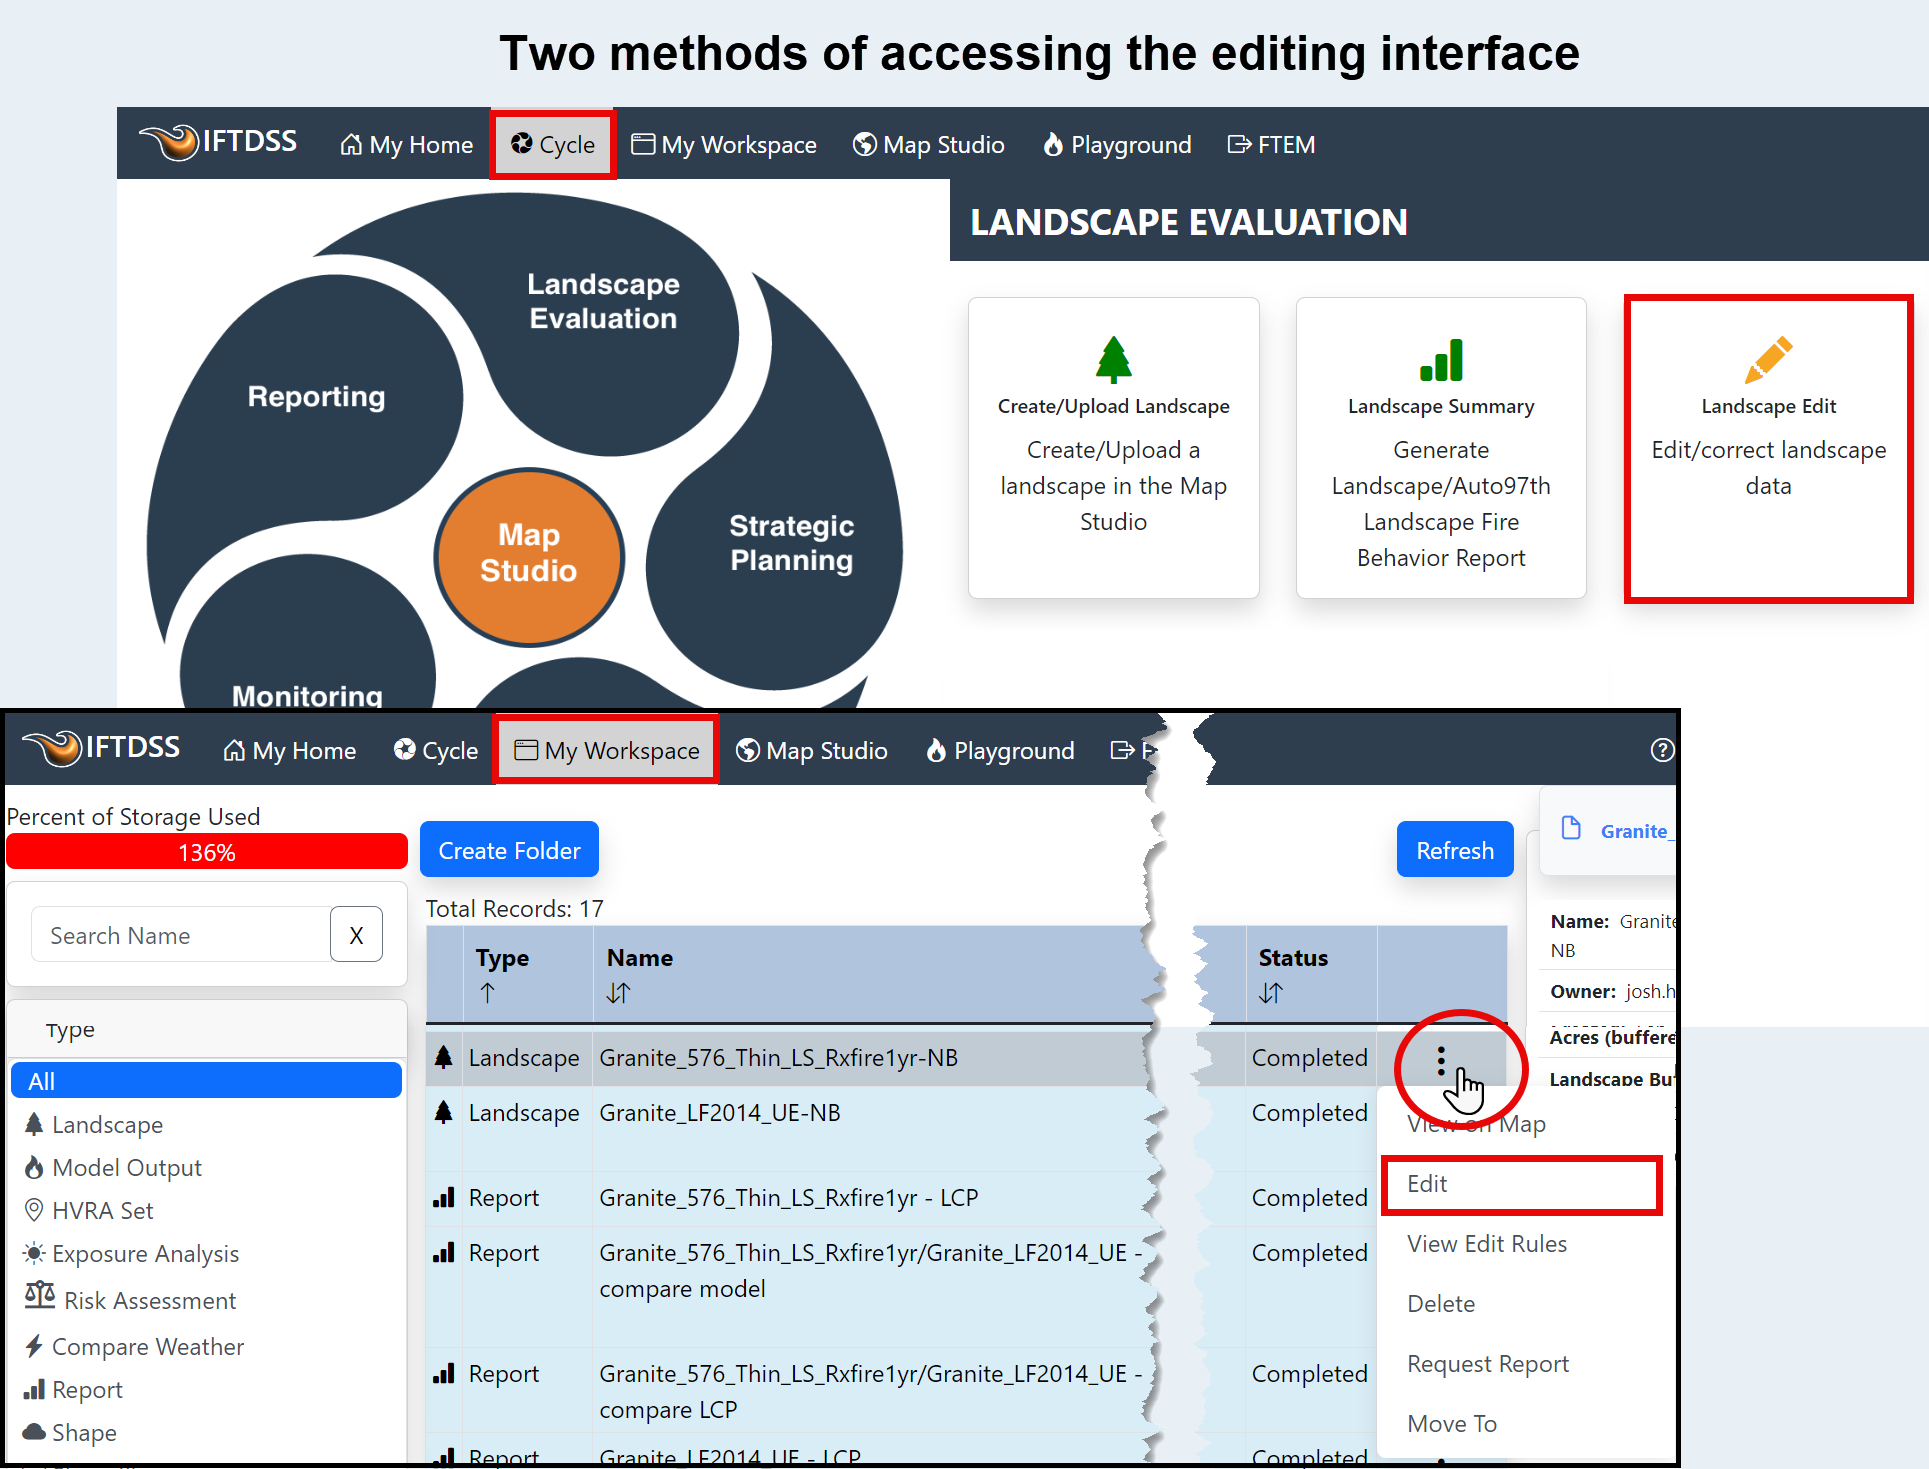 editing can be accessed from more than one place in IFTDSS